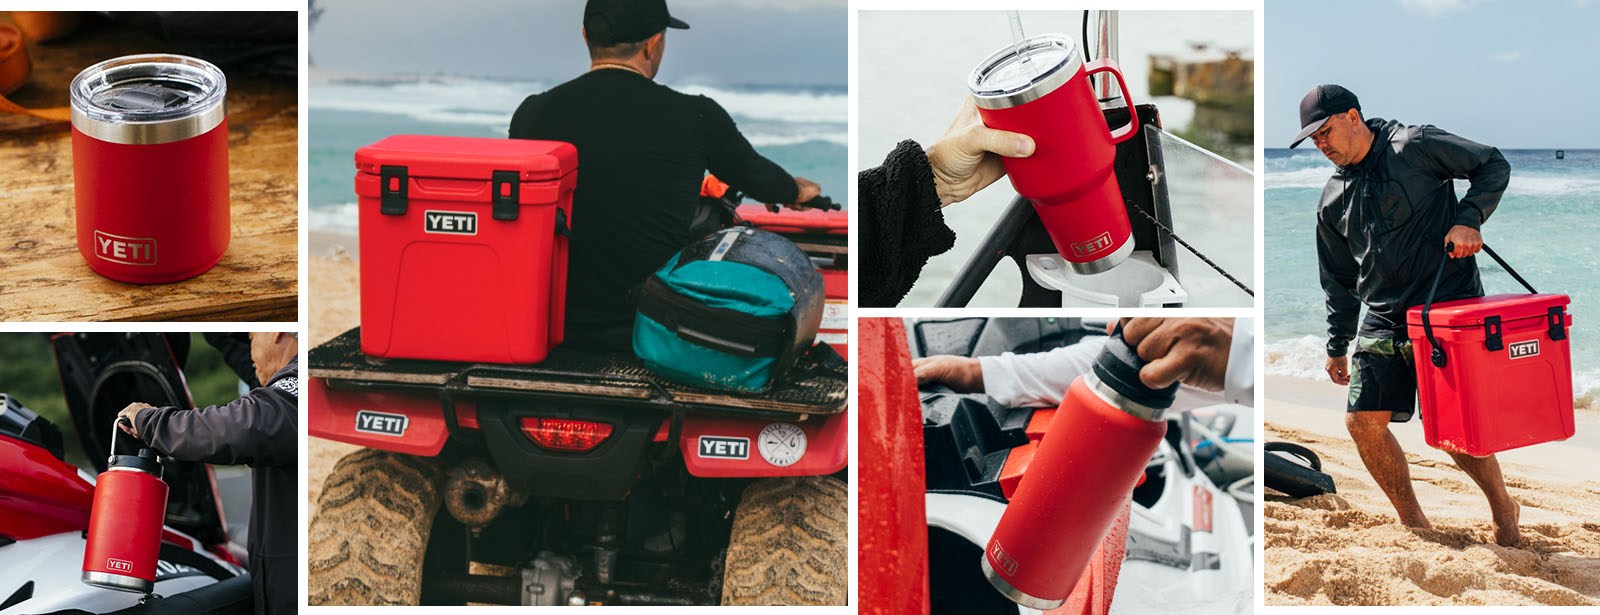 Images featuring the new YETI Rescue Red collection.